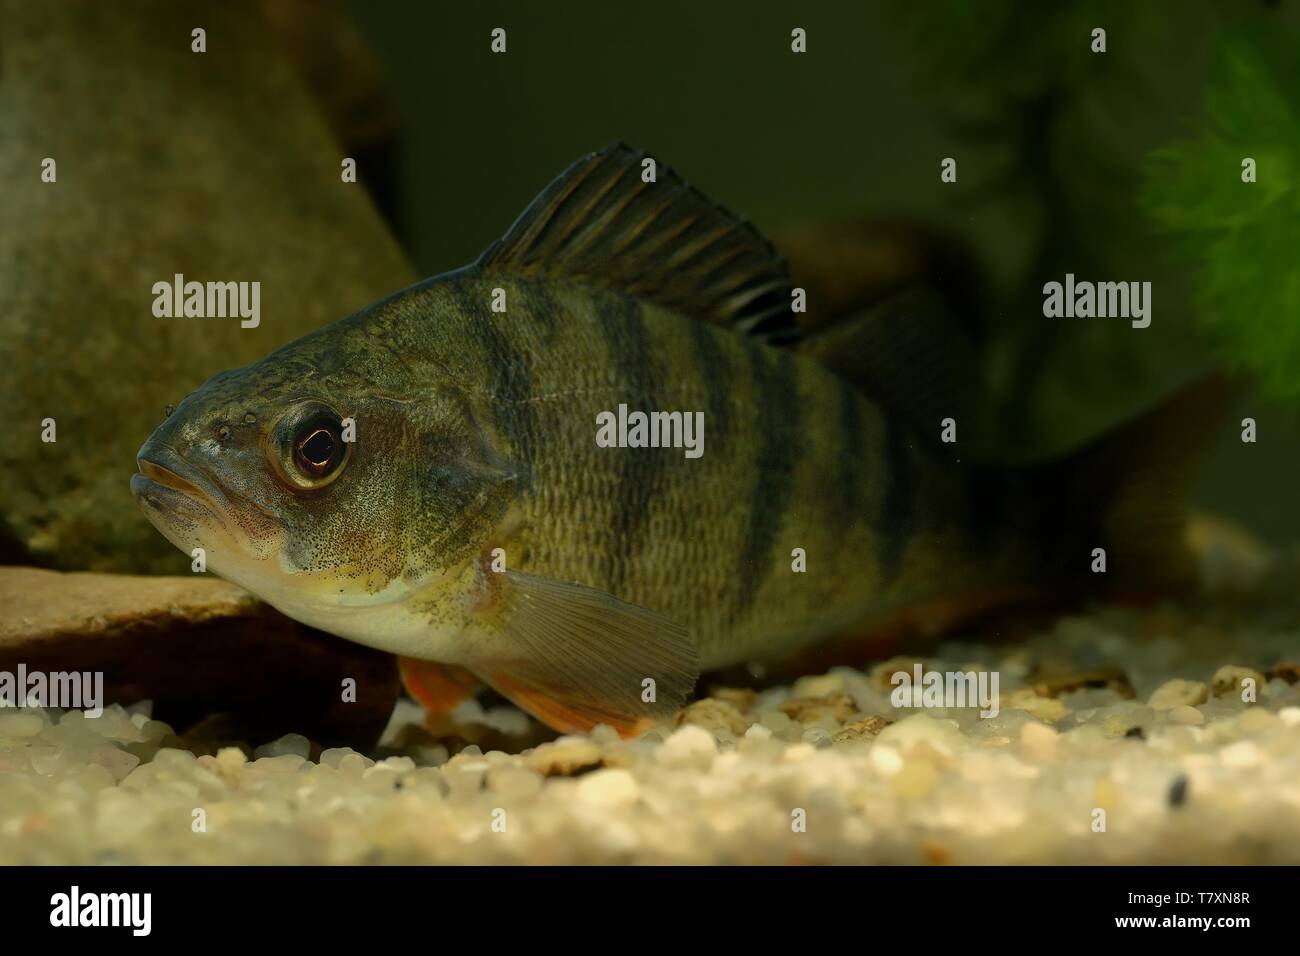 English Perch (Perca fluviatilis) underwater picture. Fish is resting on the bottom of the river. Stock Photo